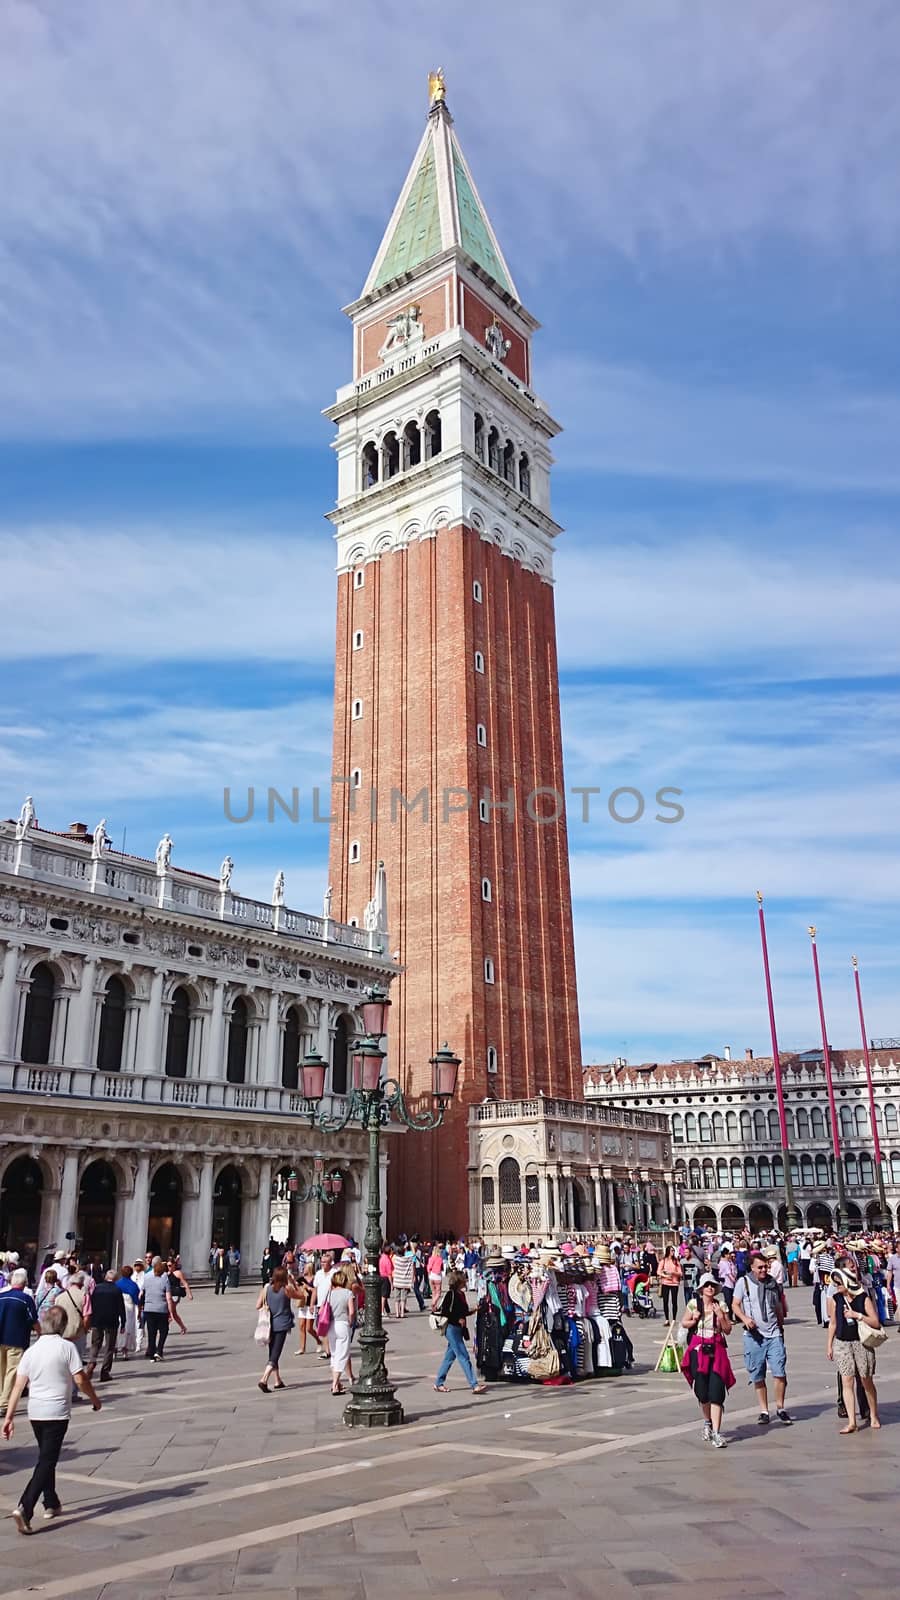 VENICE, ITALY - SEPTEMBER 26: Campanile or bell tower of St Mark's church and the Logetta at its foot in Piazza San Μarco or St Mar's Square on September 26, 2014 in Venice, Italy.